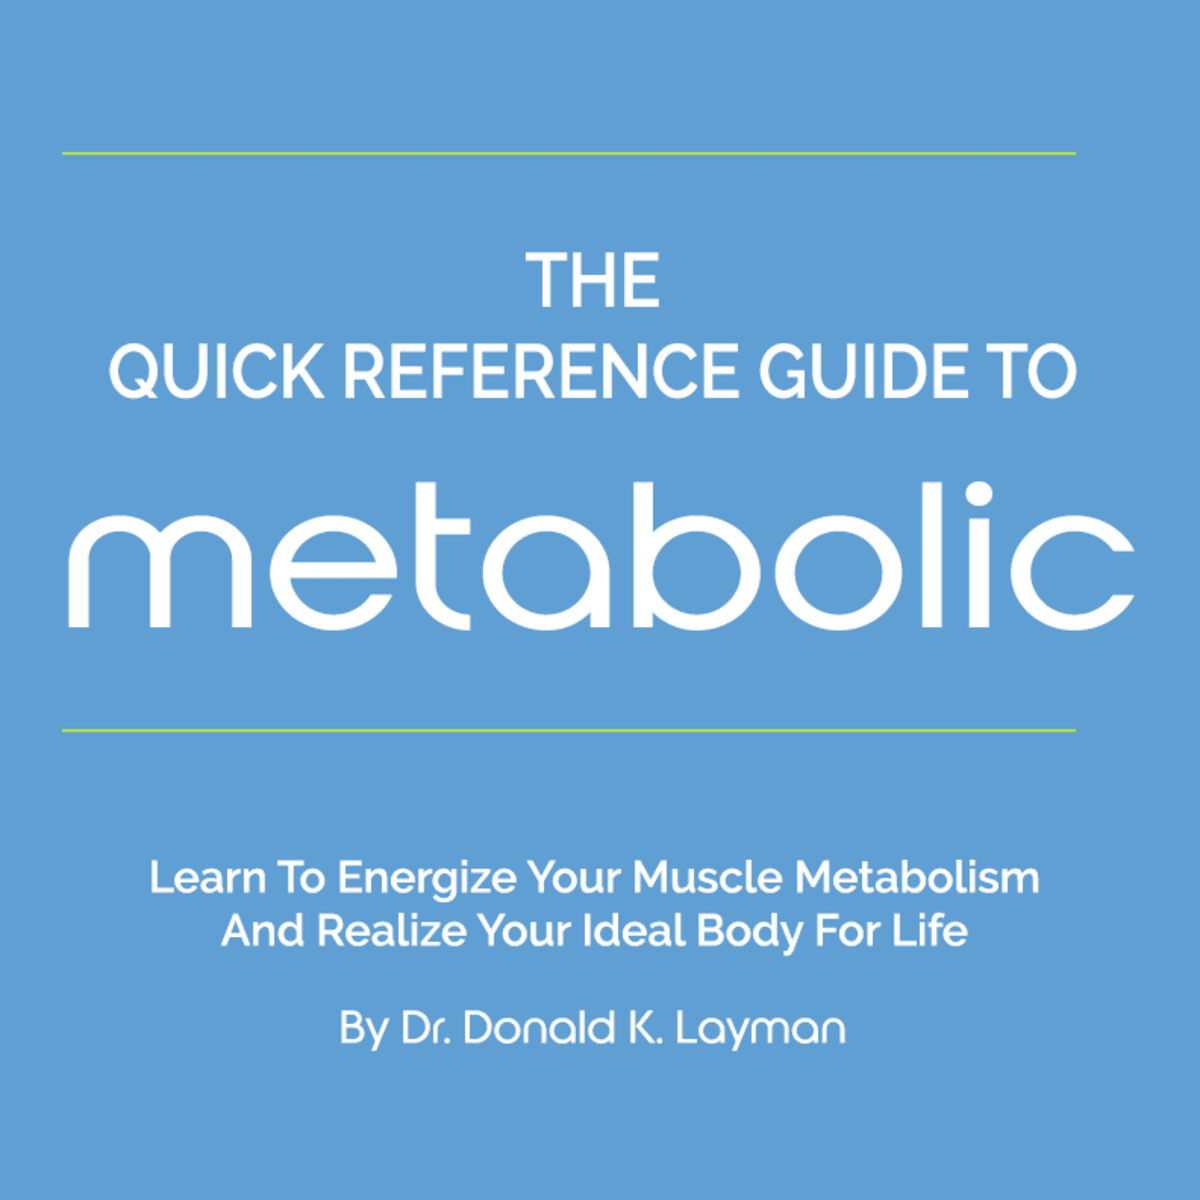 The Quick Reference Guide to Metabolic E-book